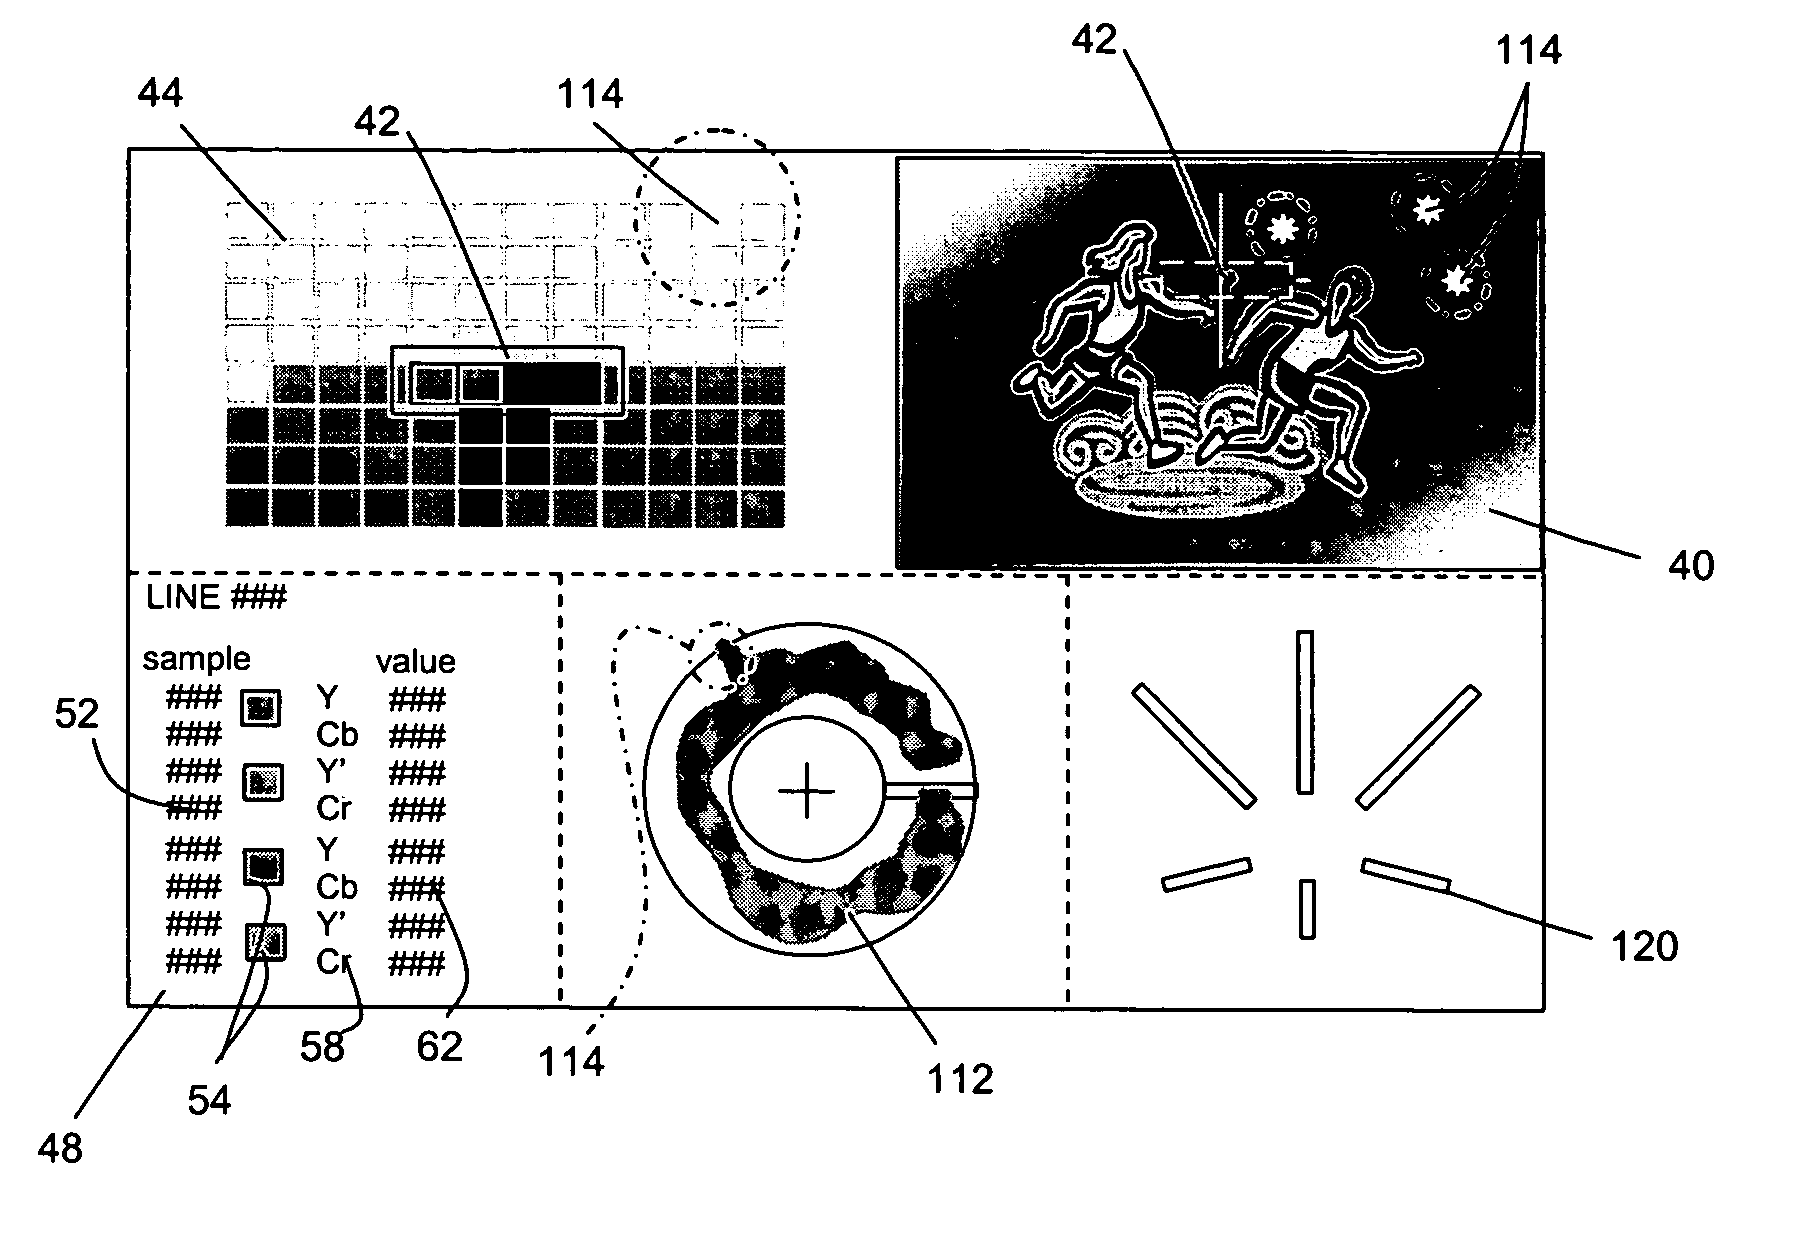 Method and apparatus for analysis of digital video images